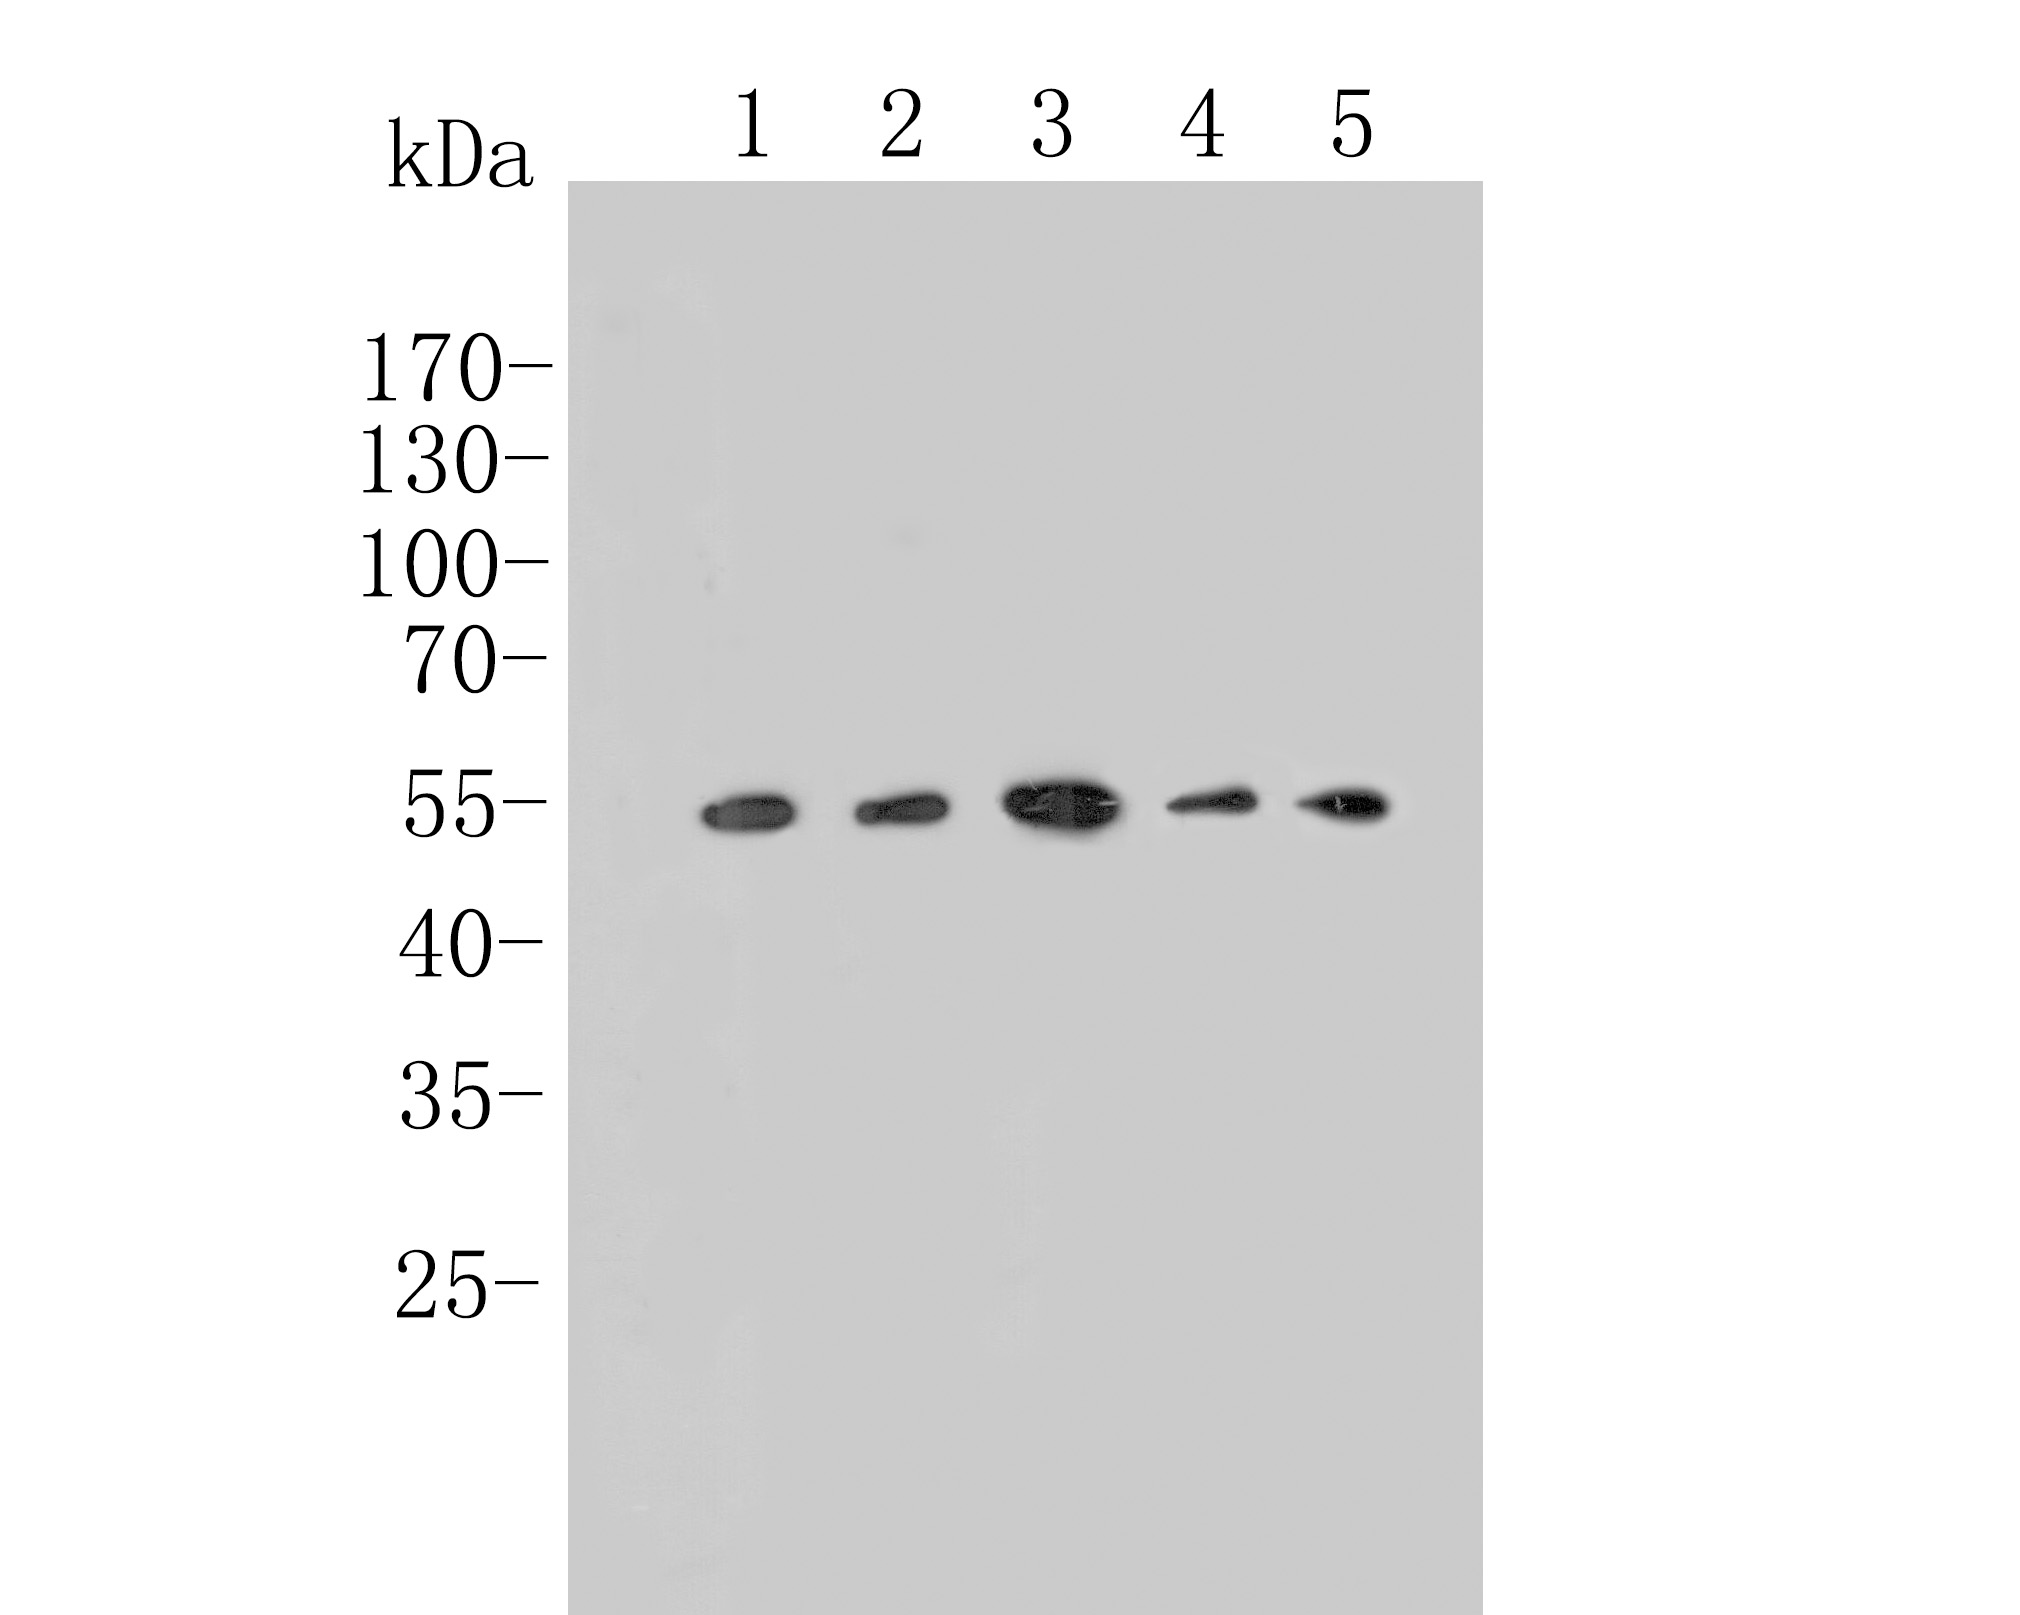 Western blot analysis of TGF beta 1 on different lysates. Proteins were transferred to a PVDF membrane and blocked with 5% BSA in PBS for 1 hour at room temperature. The primary antibody (HA500496, 1/500) was used in 5% BSA at room temperature for 2 hours. Goat Anti-Rabbit IgG - HRP Secondary Antibody (HA1001) at 1:200,000 dilution was used for 1 hour at room temperature.<br />
Positive control: <br />
Lane 1: PC-3 cell lysate<br />
Lane 2: A549 cell lysate<br />
Lane 3: U87 cell lysate<br />
Lane 4: Hela cell lysate<br />
Lane 5: K562 cell lysate